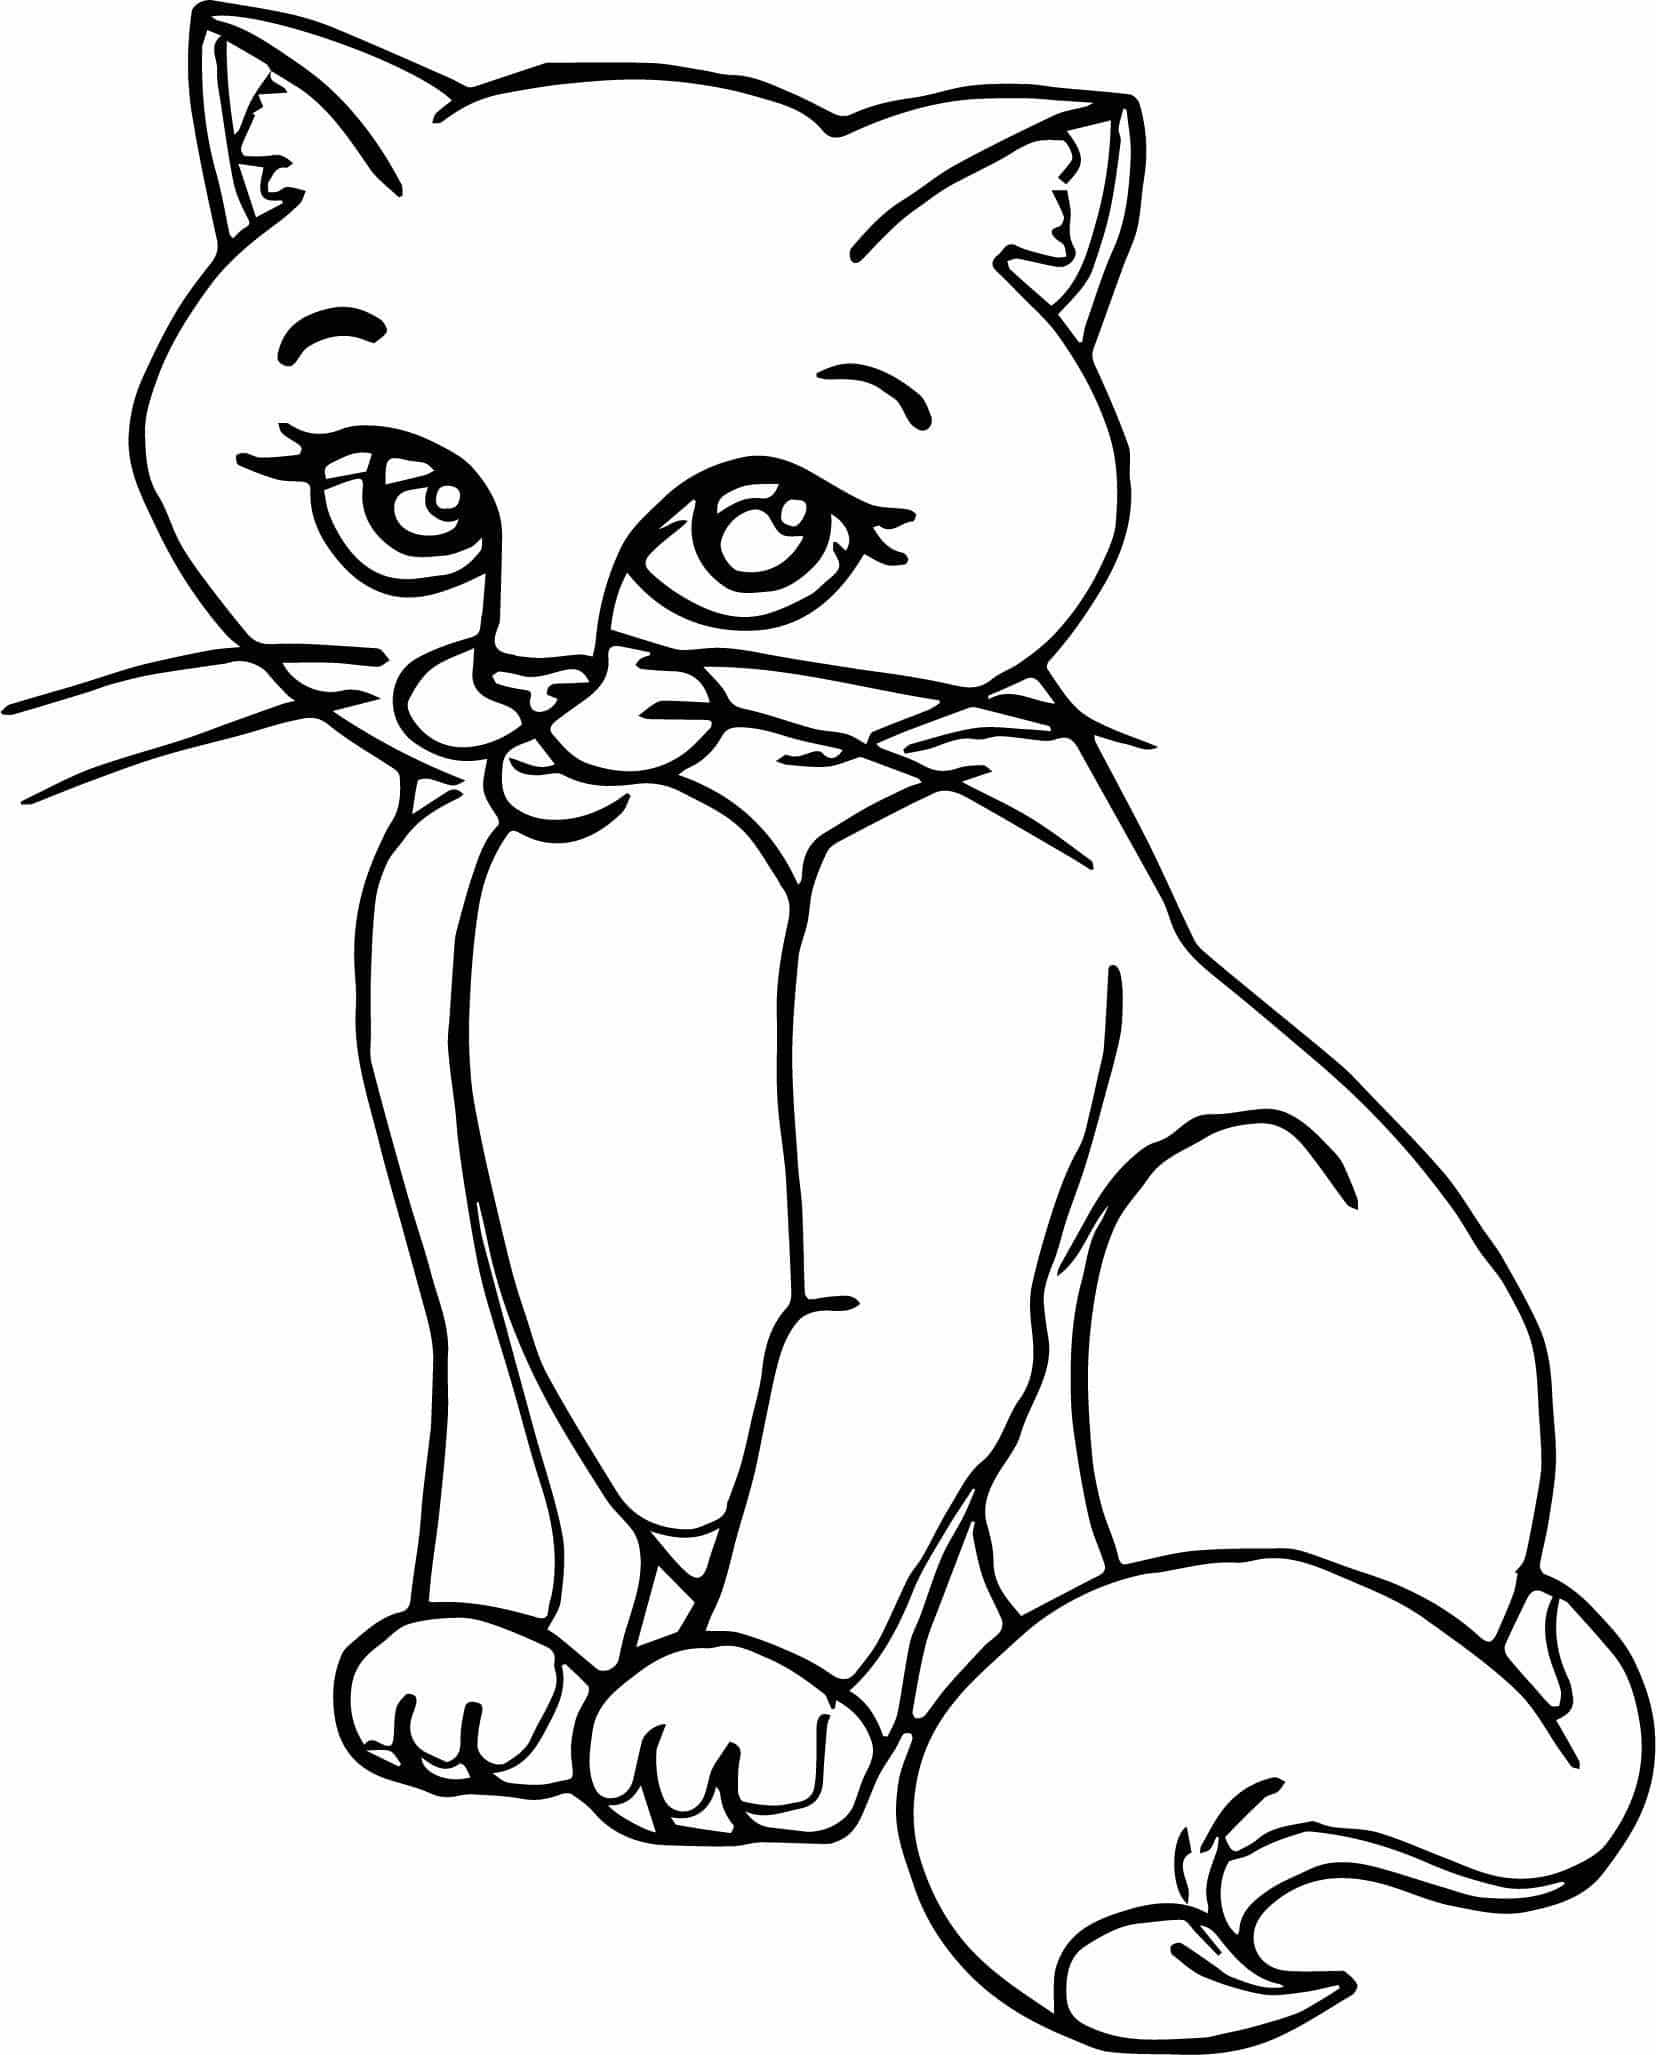 Persian Cat Coloring Pages at GetColorings.com